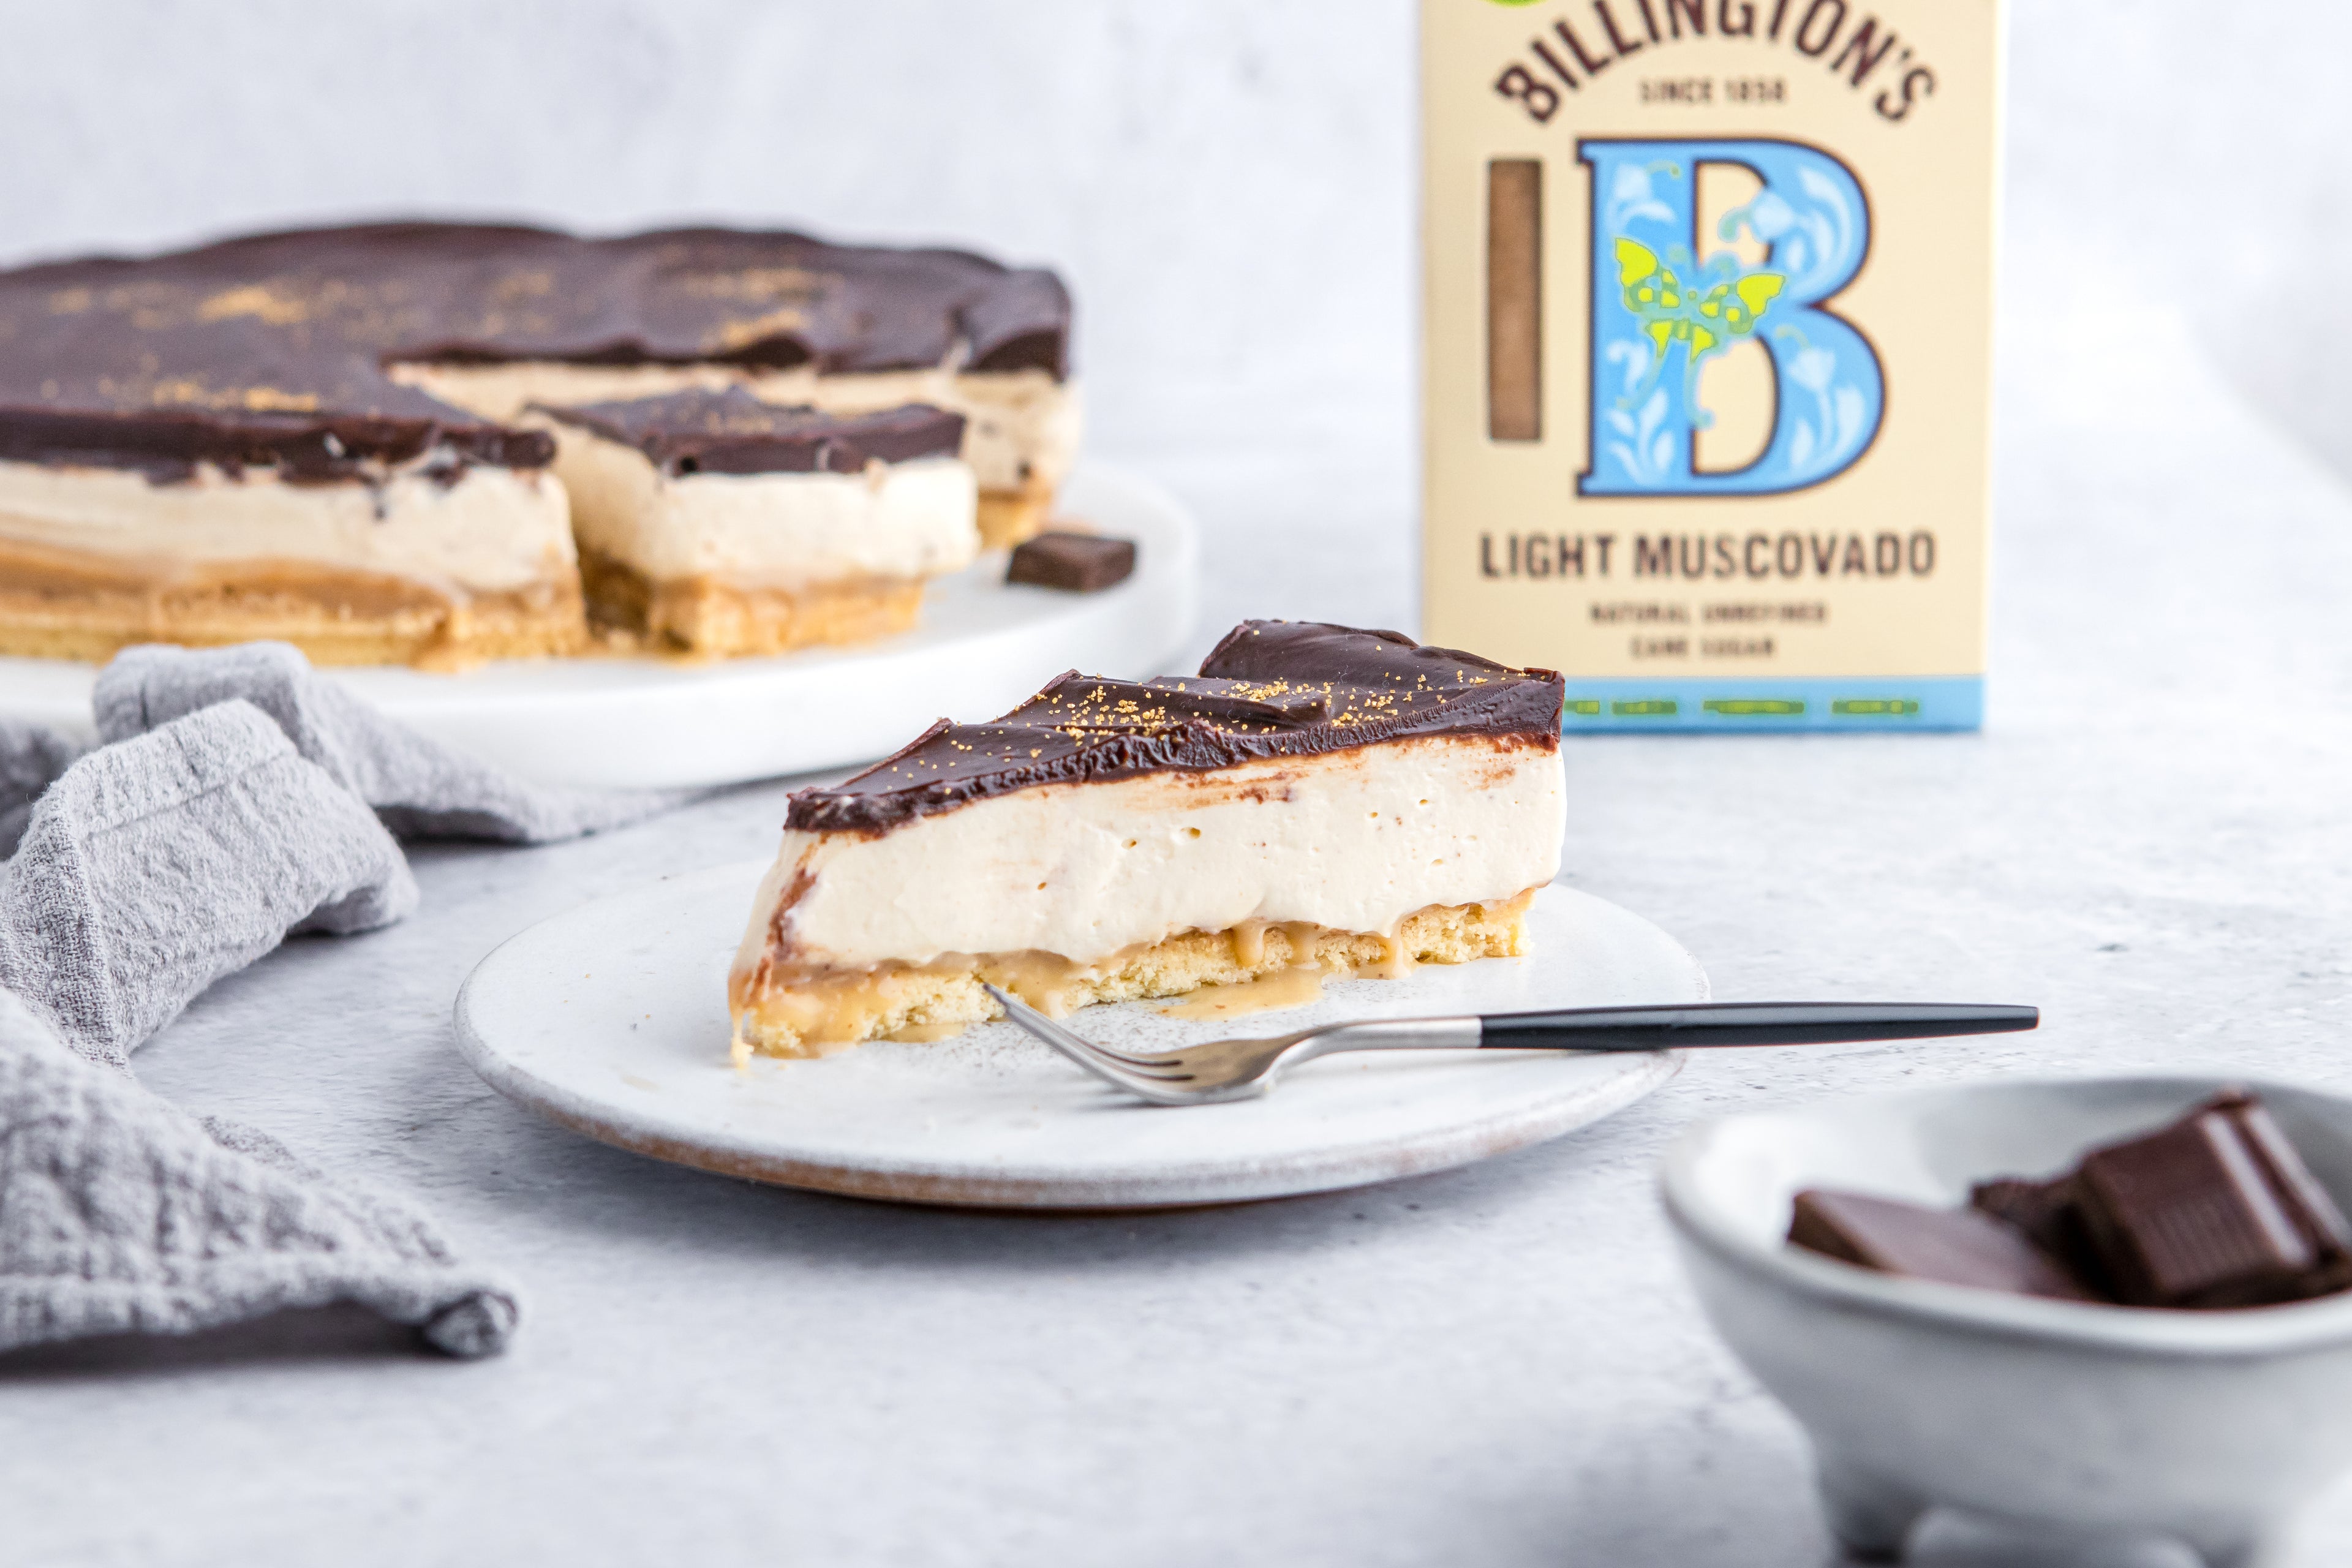 Millionaire's Cheesecake slice with a box of Billington's Light Muscovado Sugar in the background